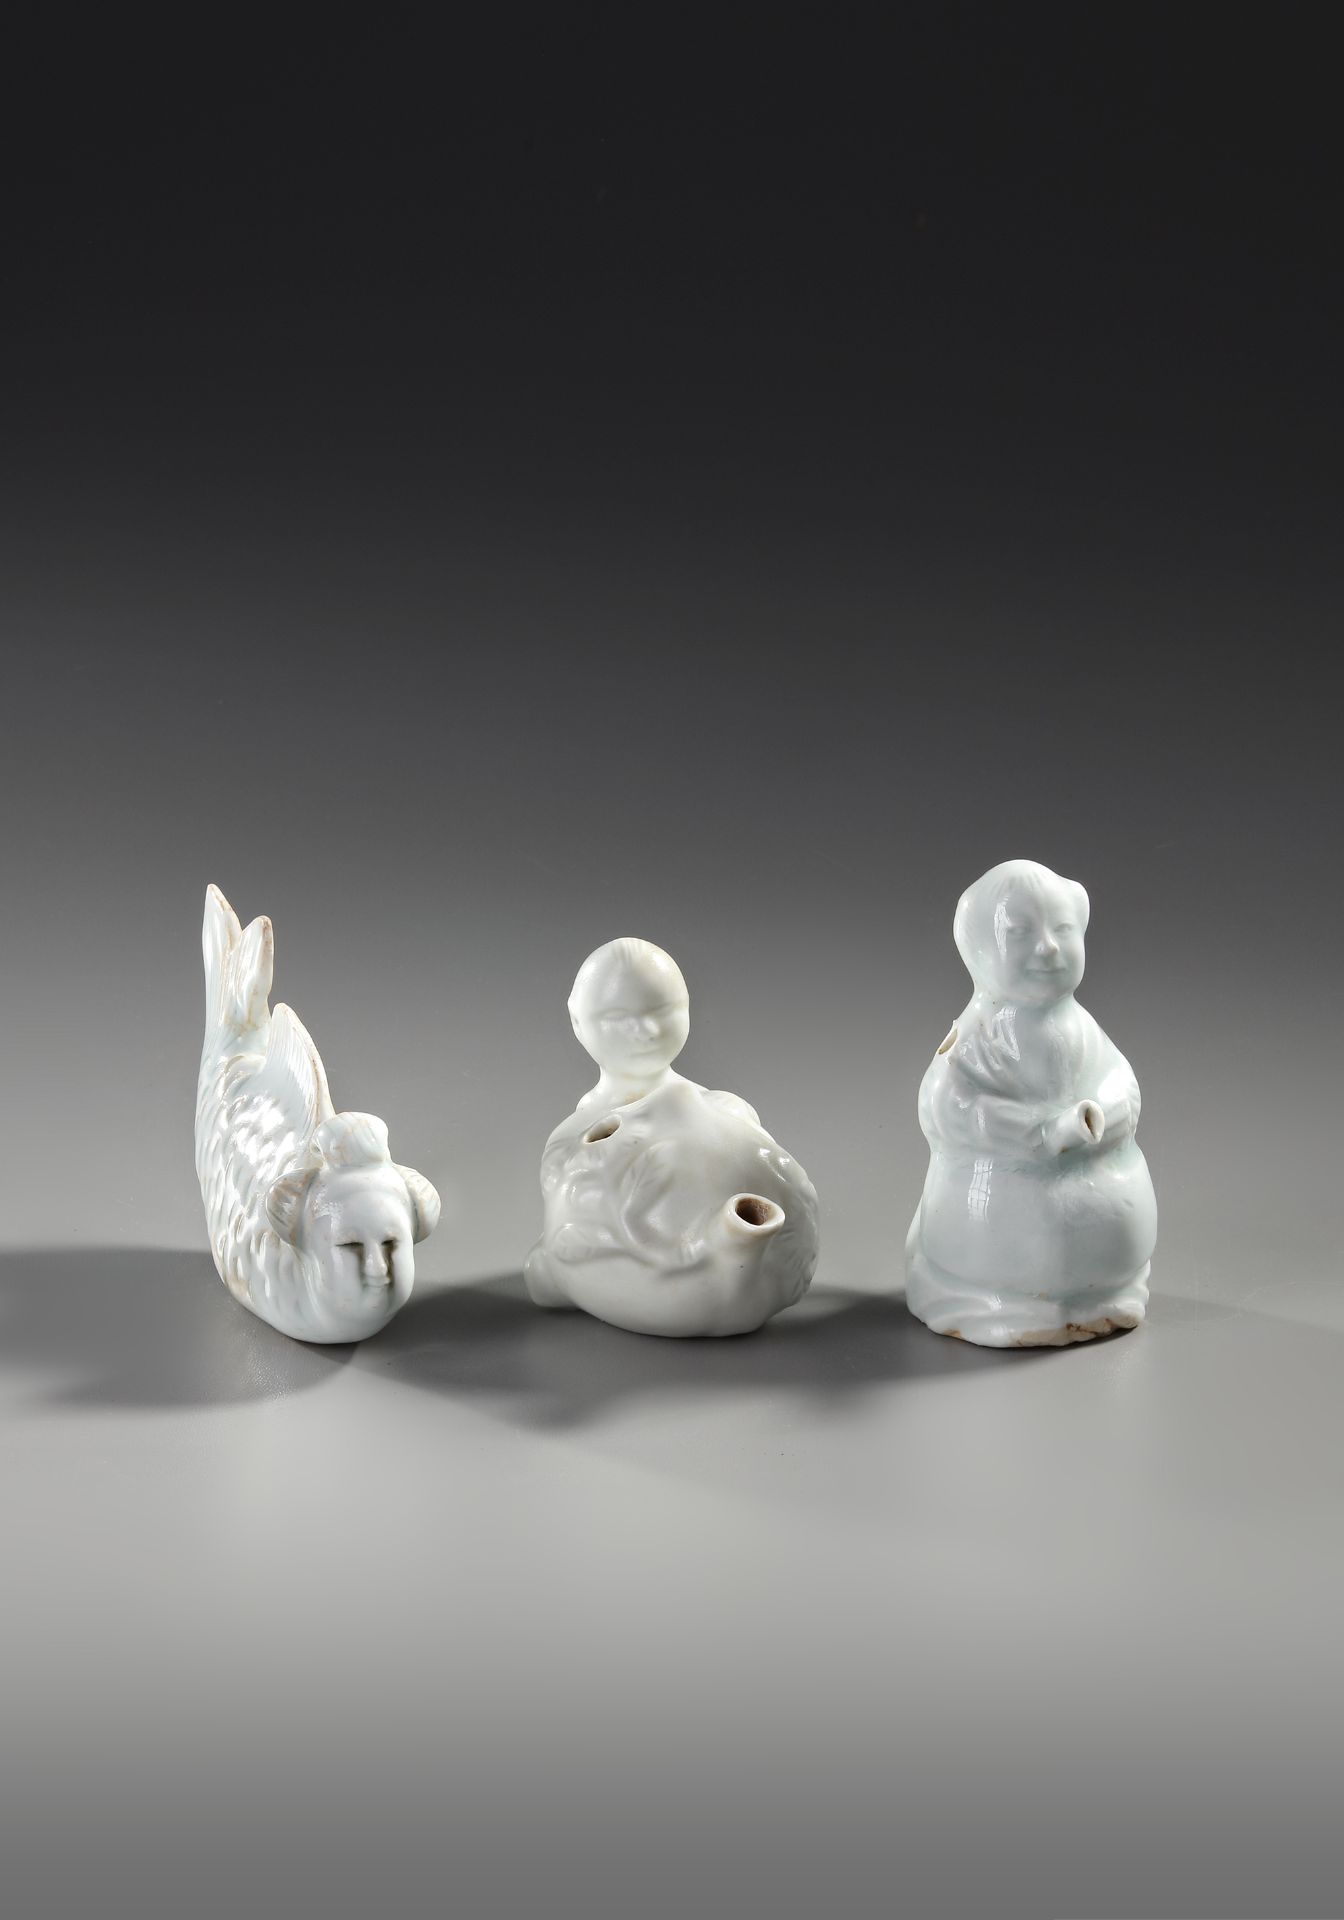 THREE CHINESE QINGBAI FIGURES, SONG DYNASTY (960-1279) - Image 3 of 4